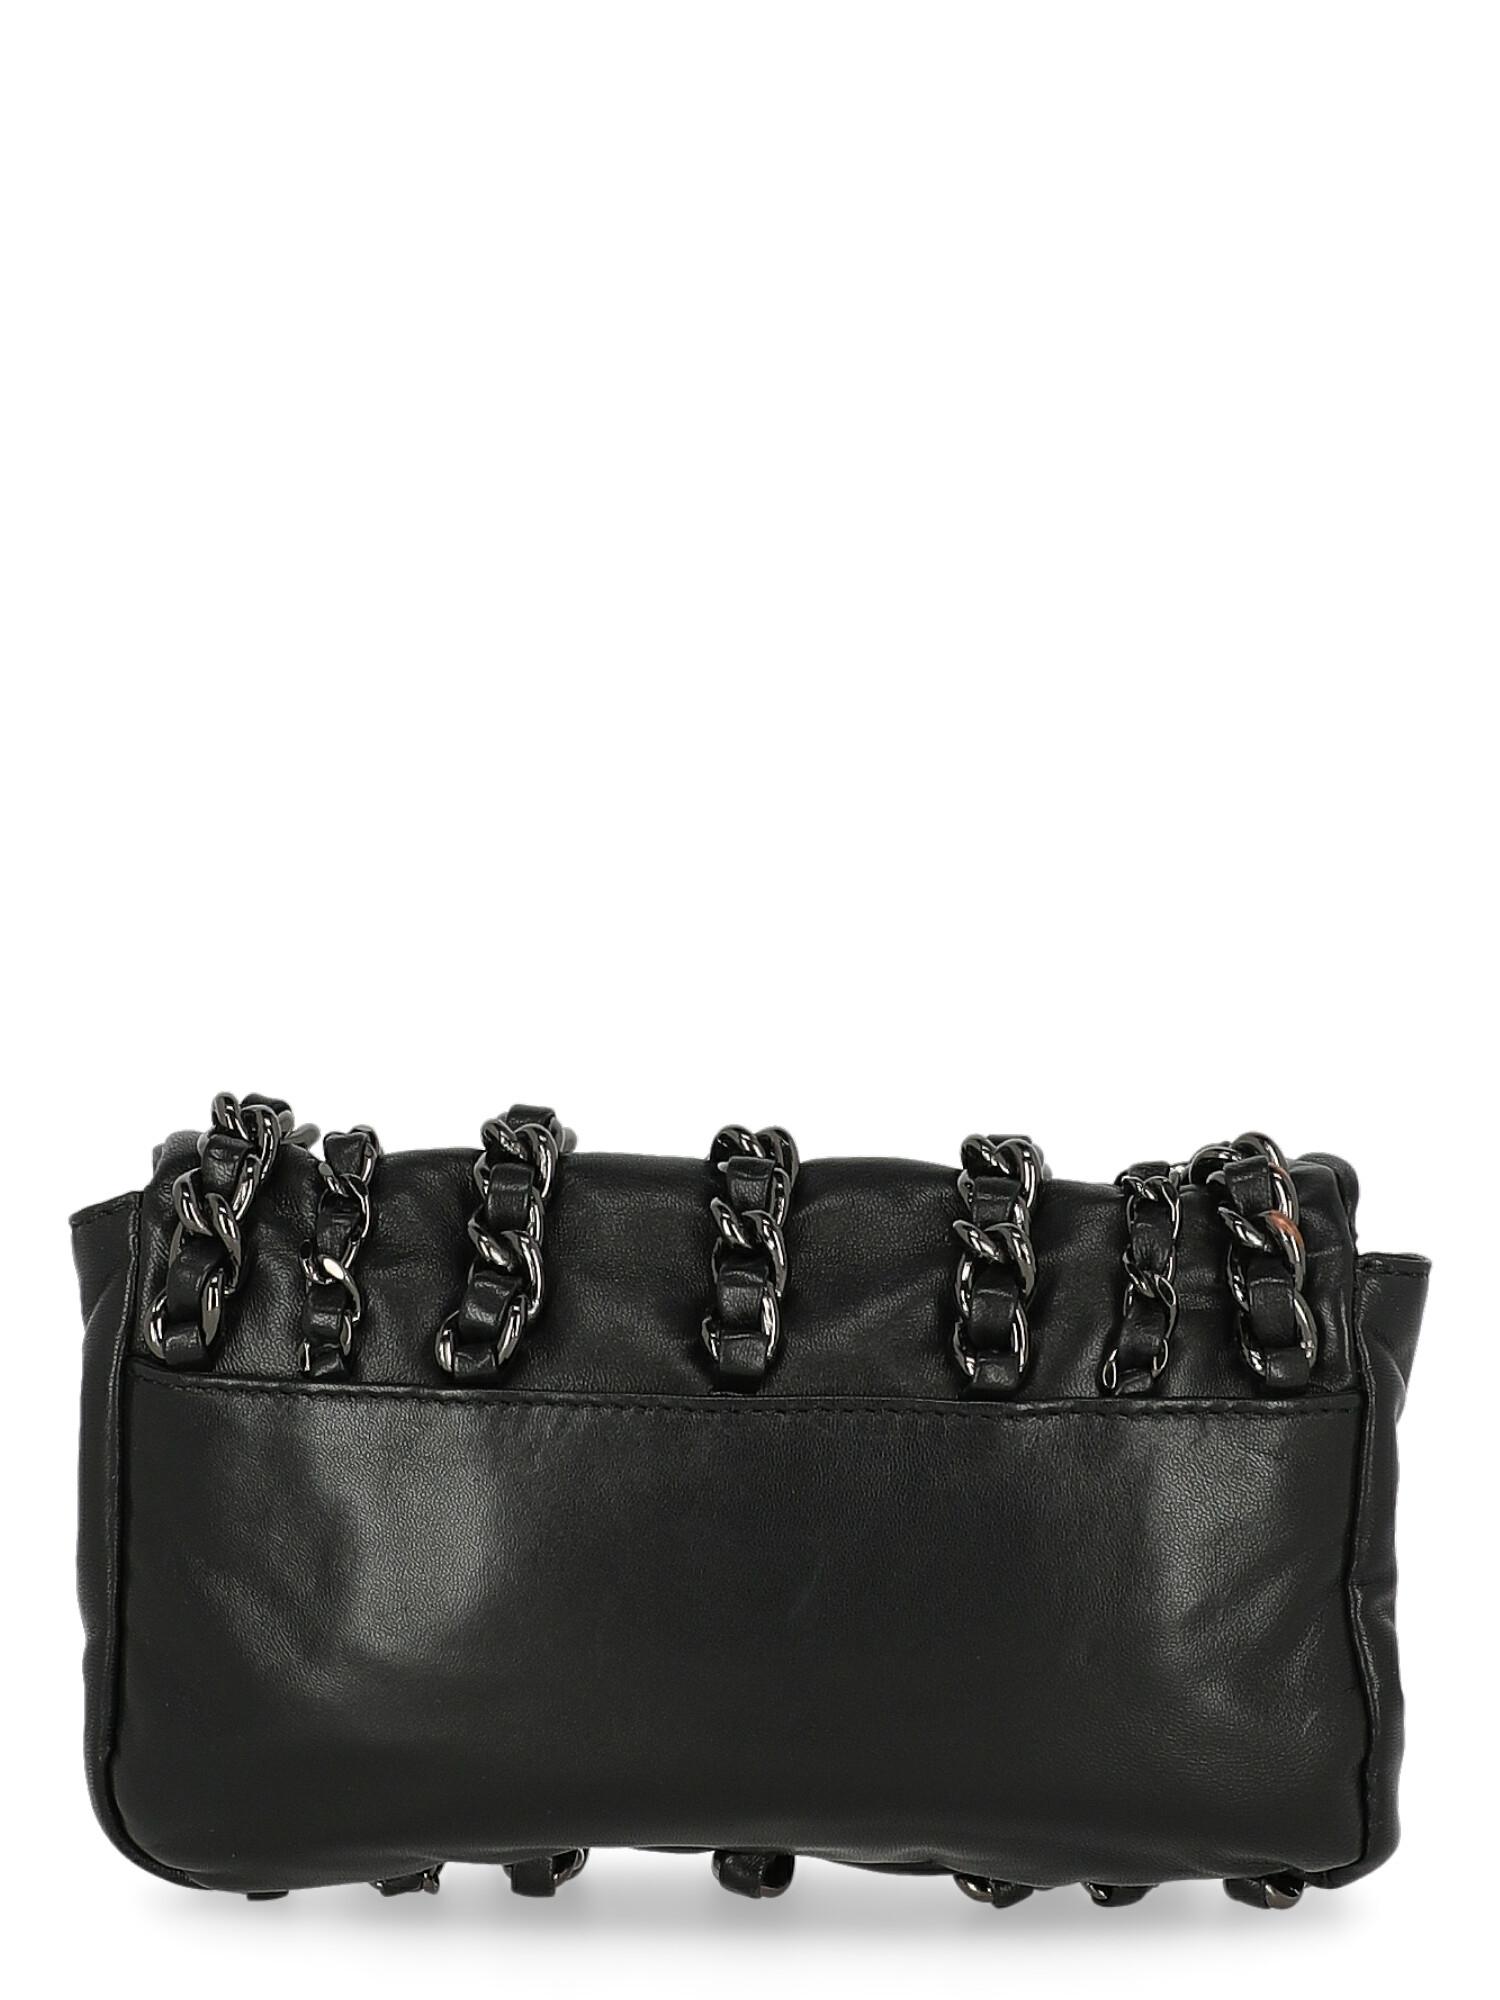 Giambattista Valli Woman Shoulder bag  Black Leather In Excellent Condition For Sale In Milan, IT